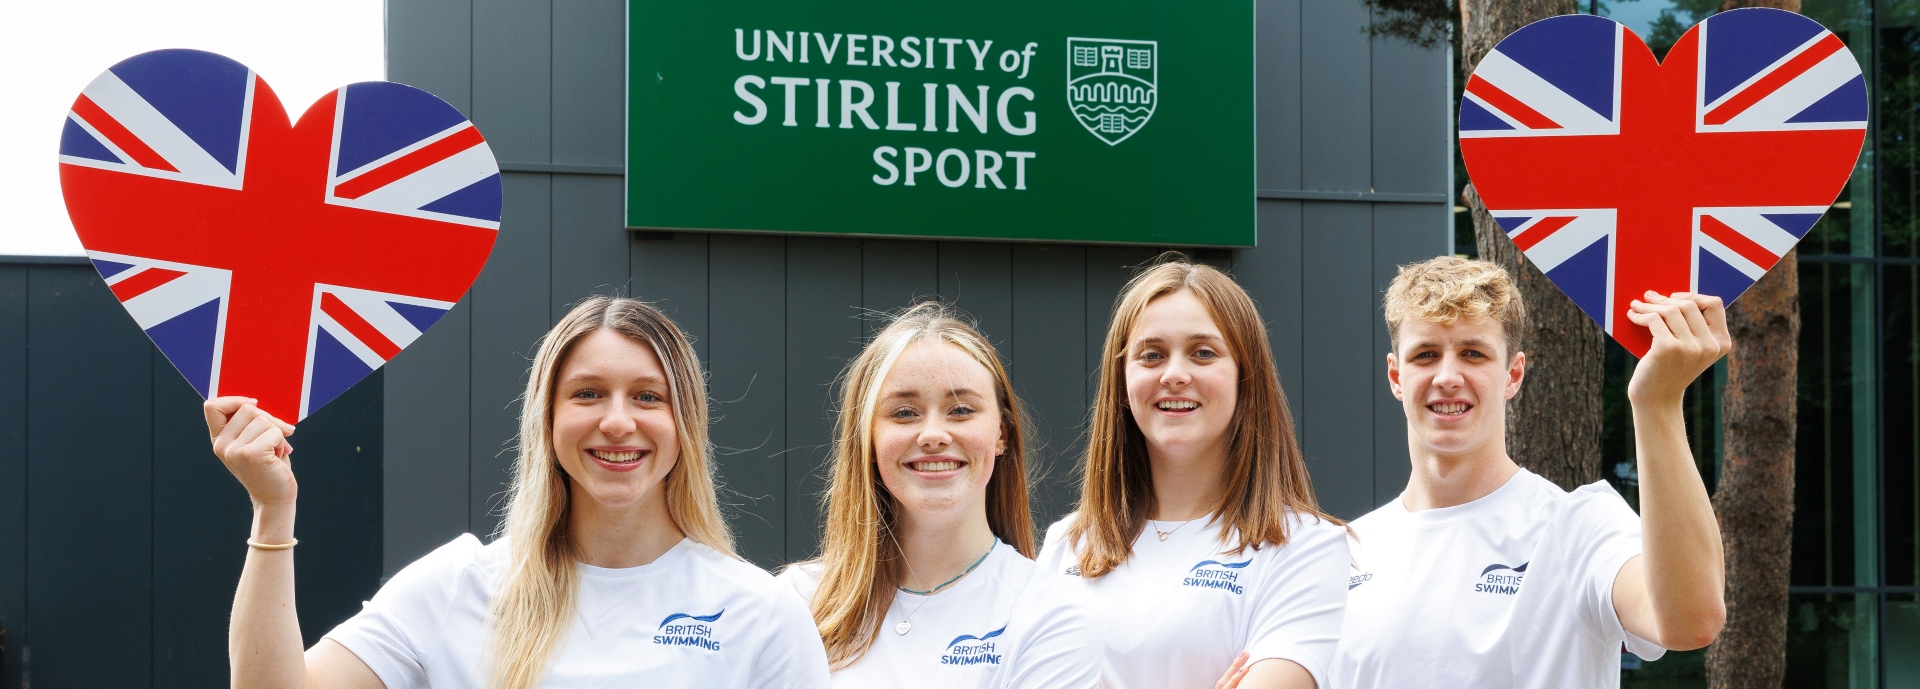 University of Stirling swimmers selected for the Euros. Left to right: Keanna MacInnes, Lucy Grieve, Evie Davis, Evan Jones.